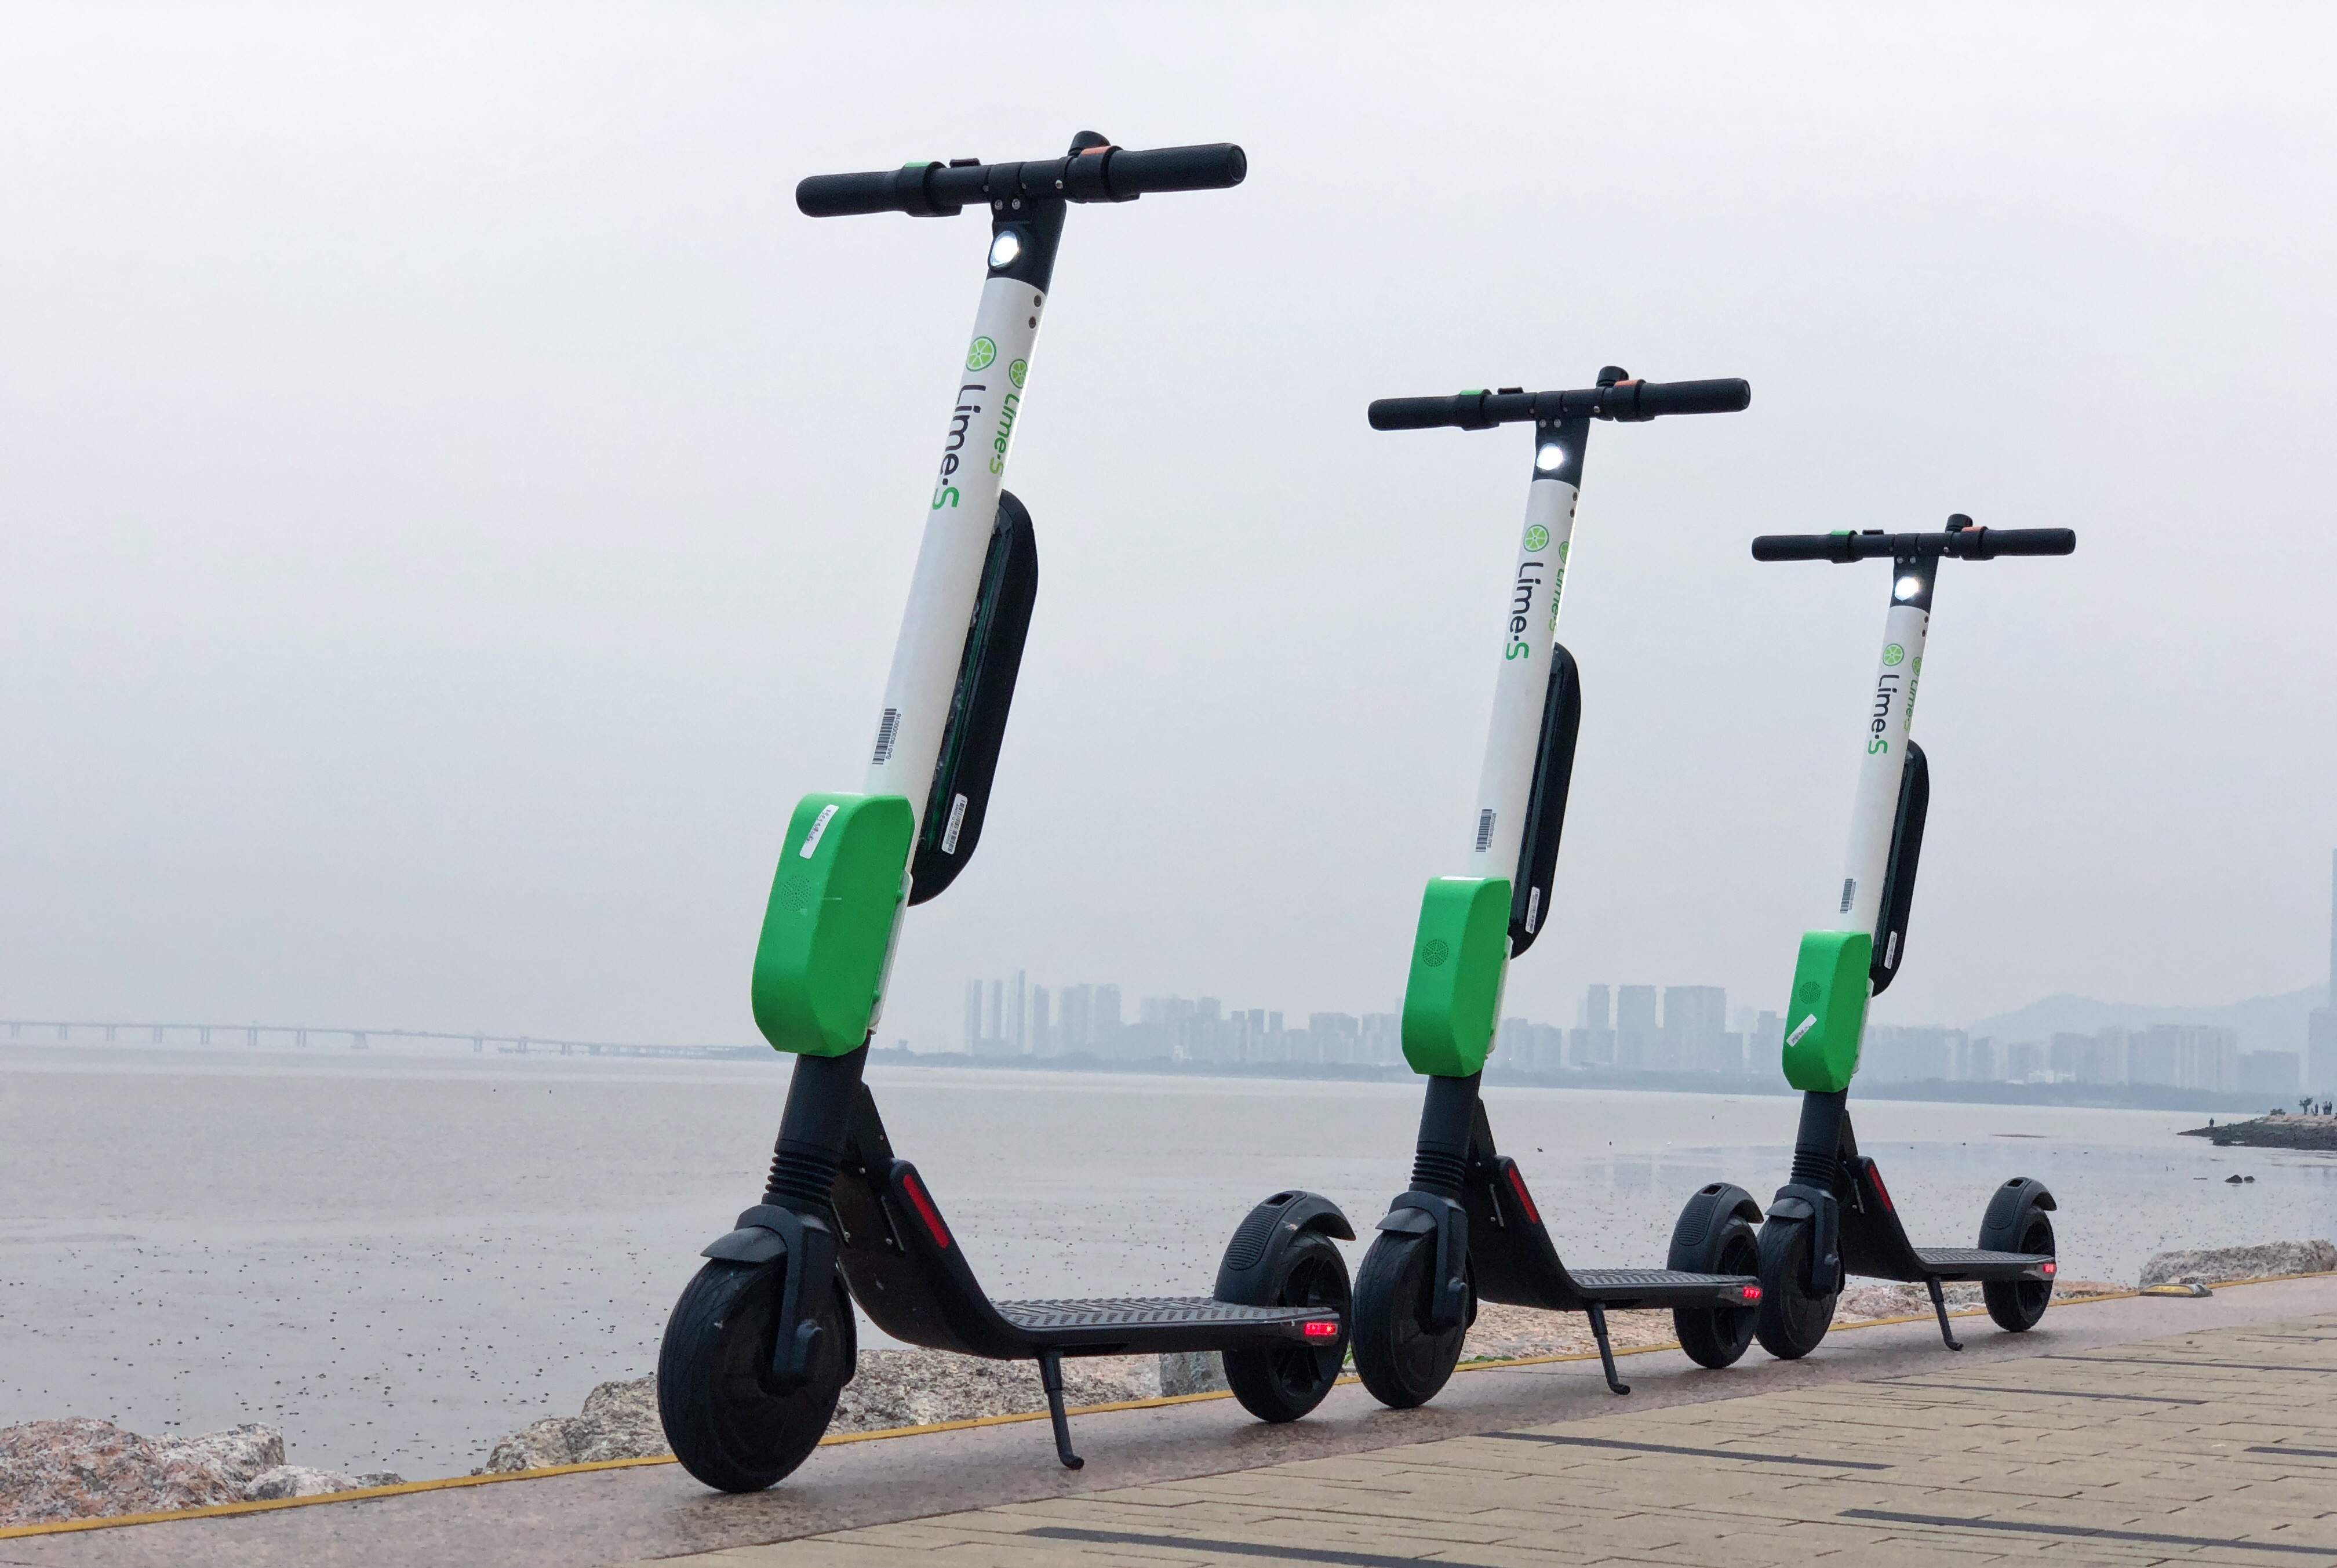 scooter-sharing, says Lime co-founder